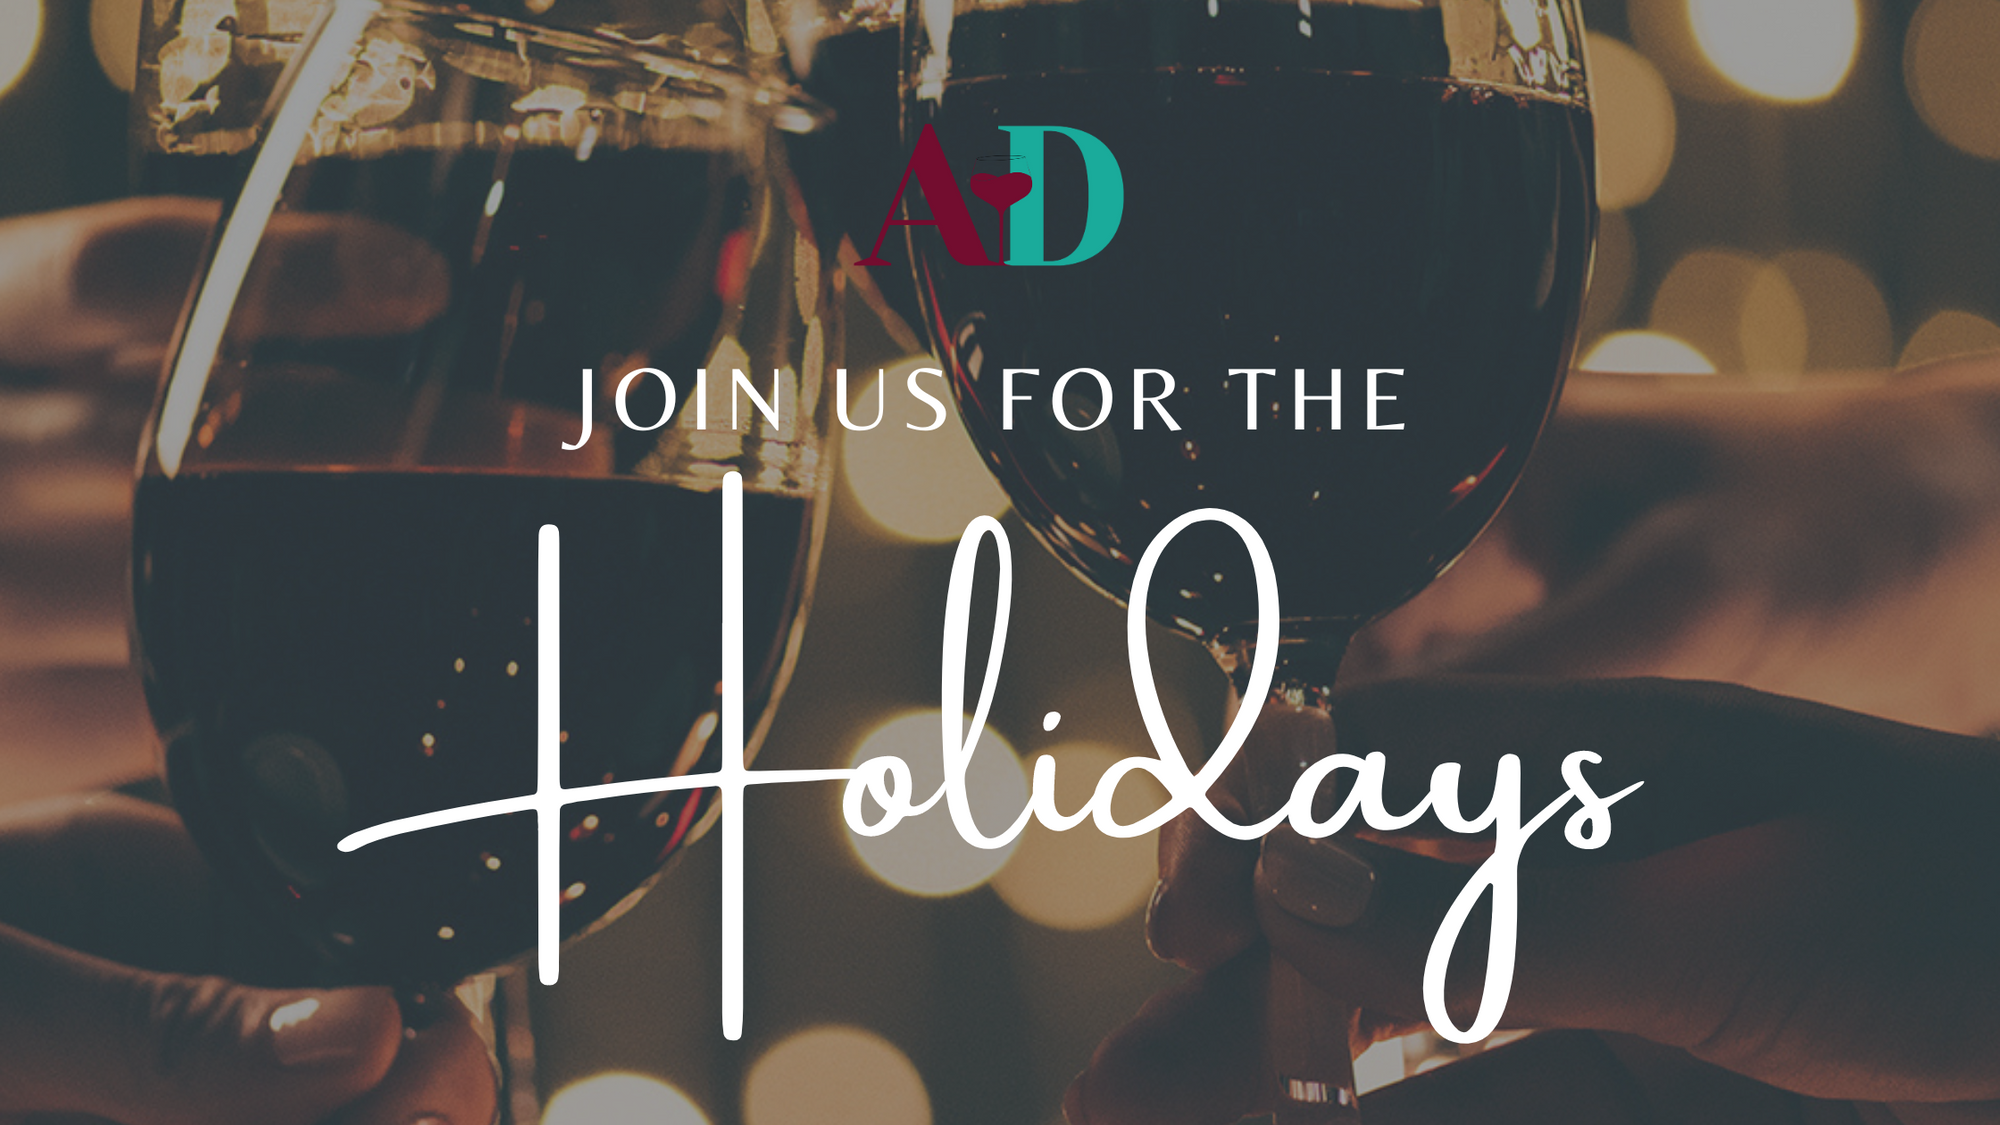 Join us for the Holidays!